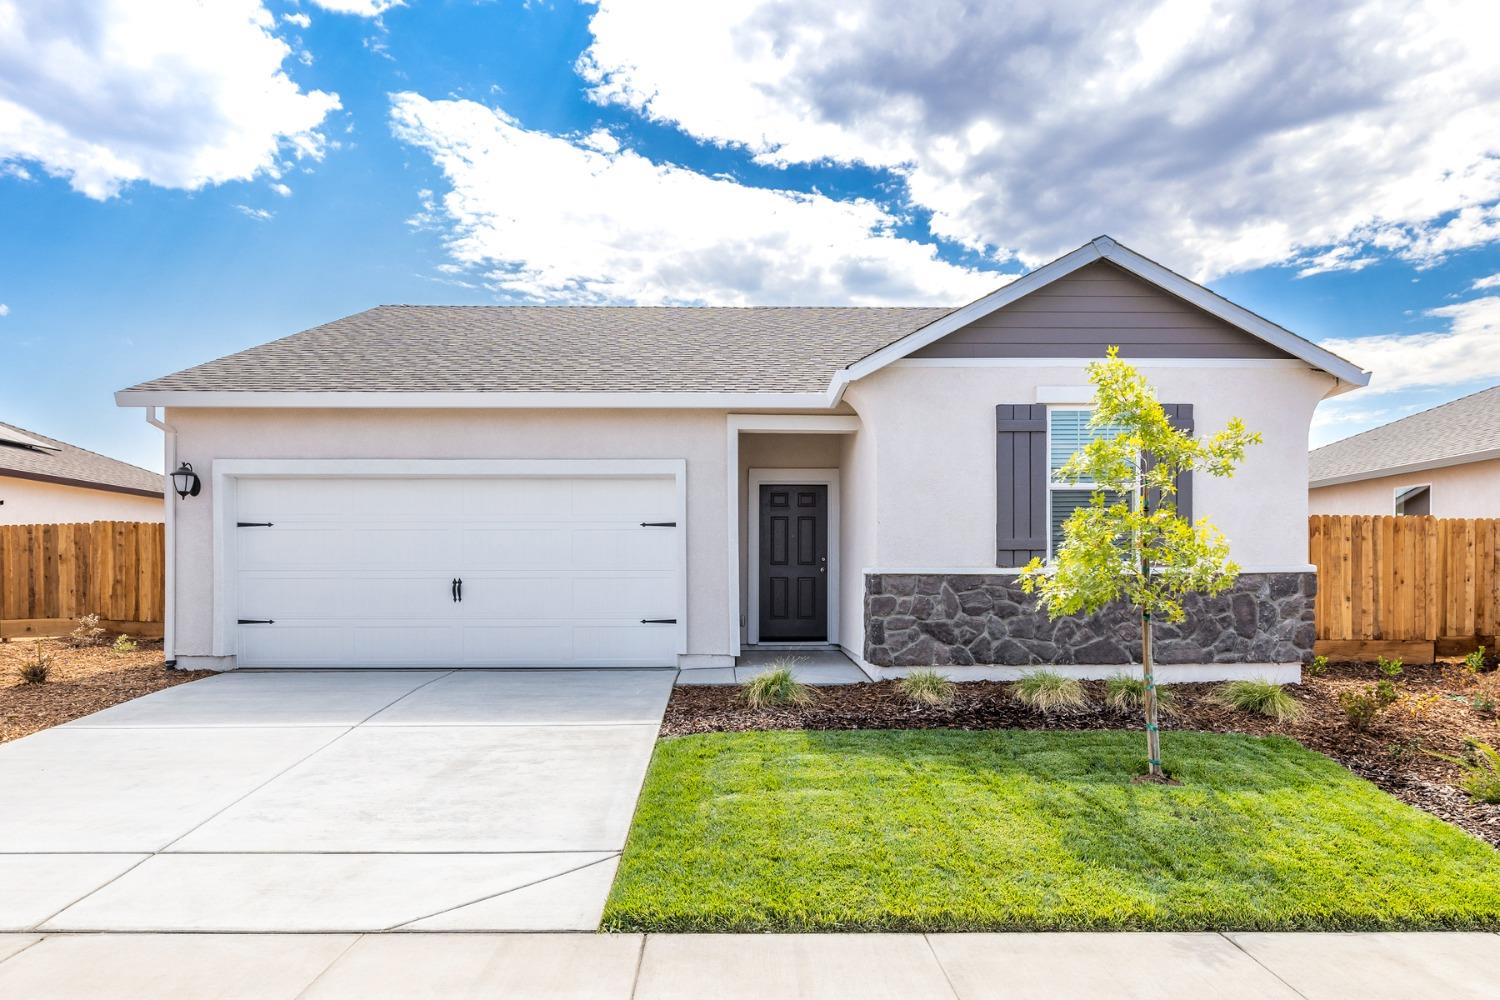 Detail Gallery Image 1 of 13 For 10501 Santana Ln, Stockton,  CA 95212 - 3 Beds | 2 Baths